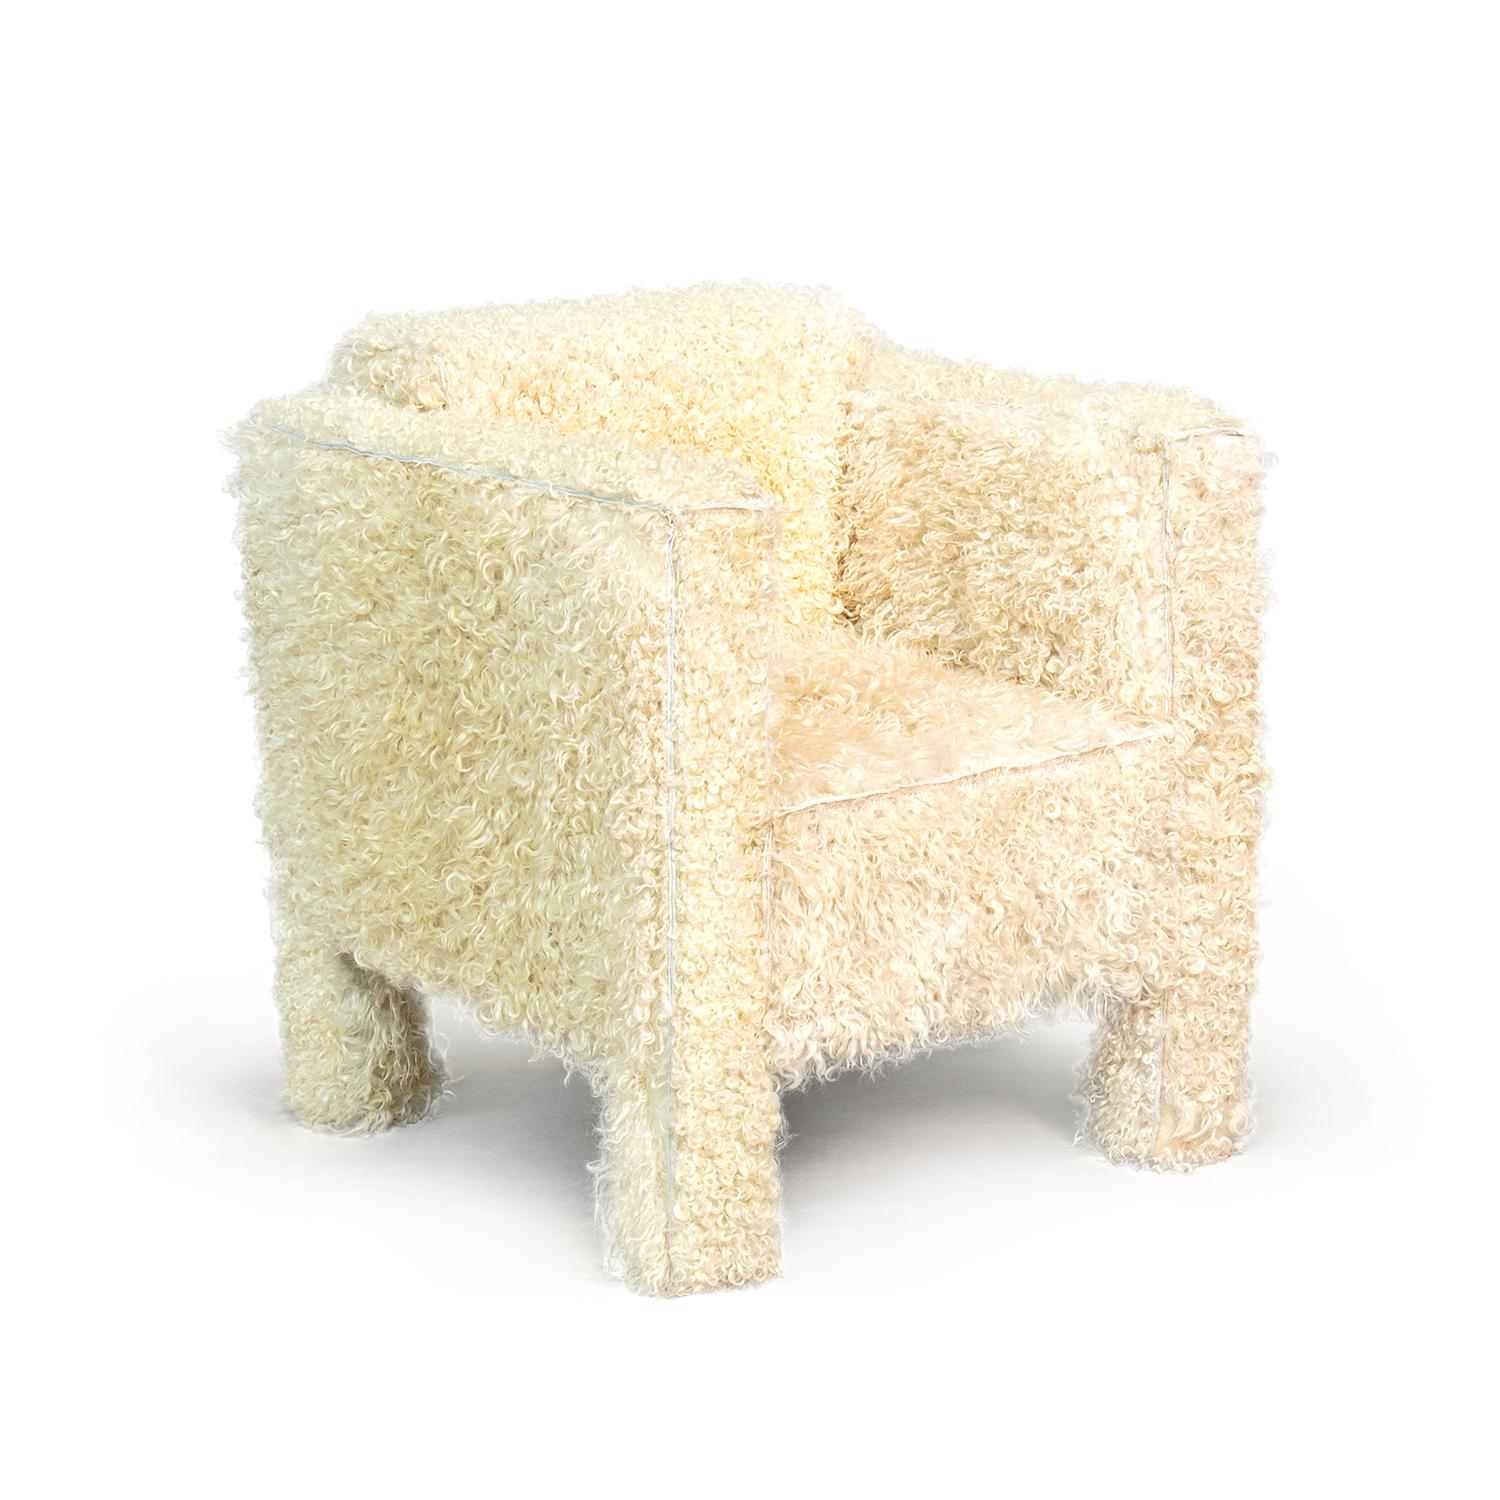 Contemporary Modern Piet Hein Eek Angora Wool Armchair Timber Natural Cream   In Excellent Condition For Sale In Amsterdam, NL